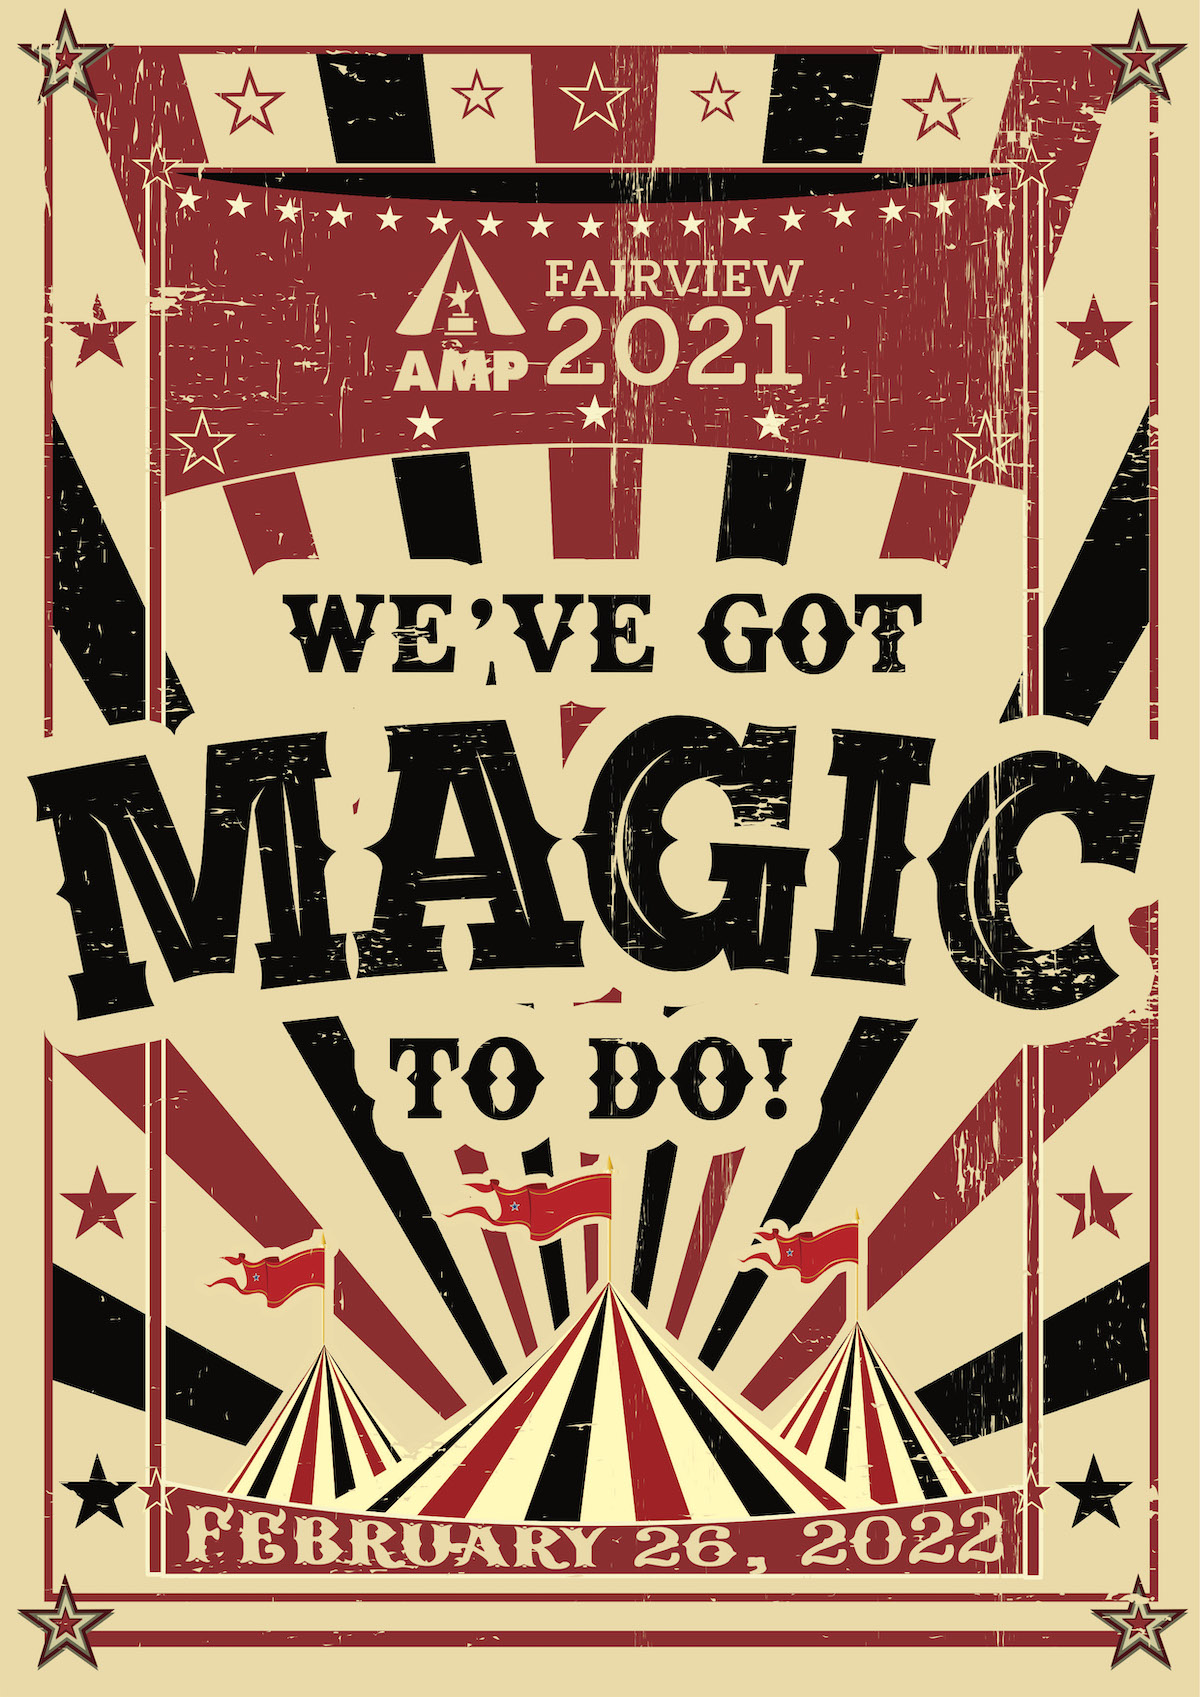 t-shirt design featuring a black and red circus tent and the words AMP Fairview 2021, We've Got Magic to Do!, February 26, 2022